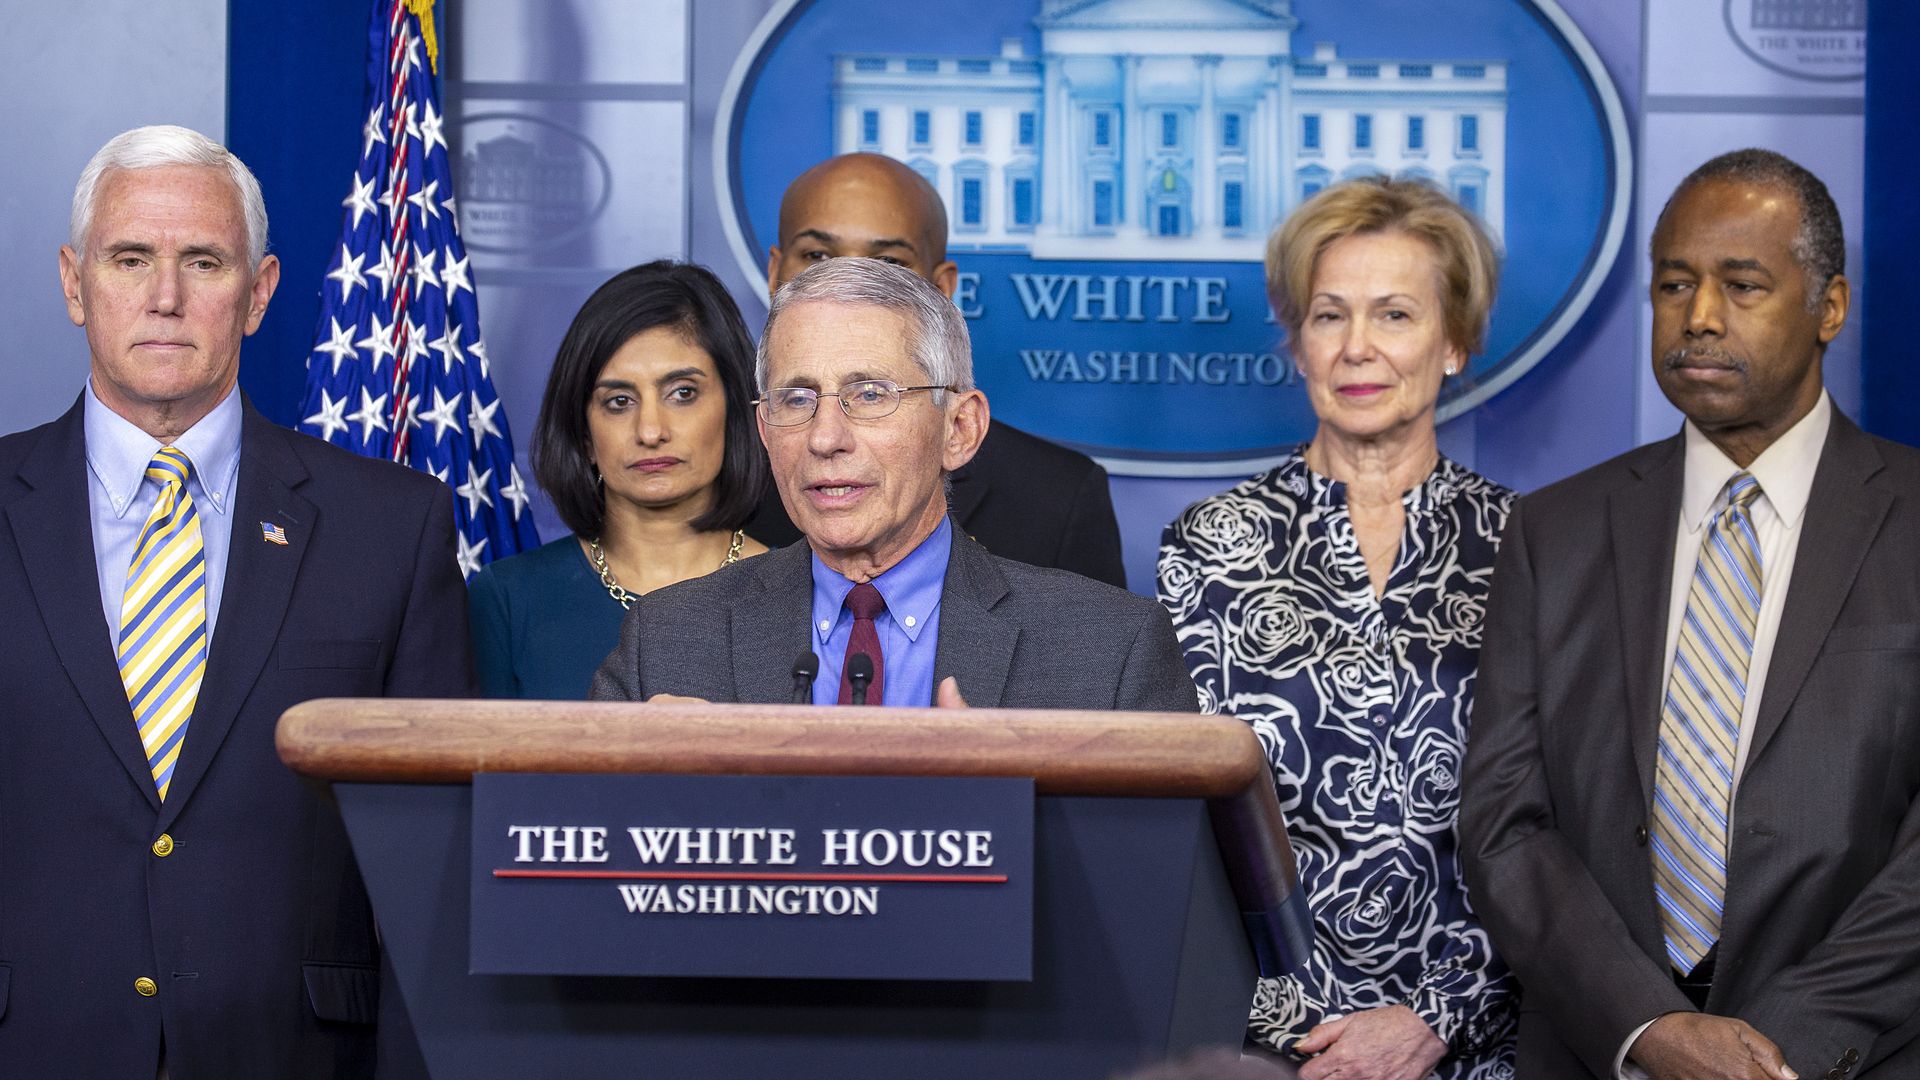 Dr. Anthony Fauci speaking at a White House press conference